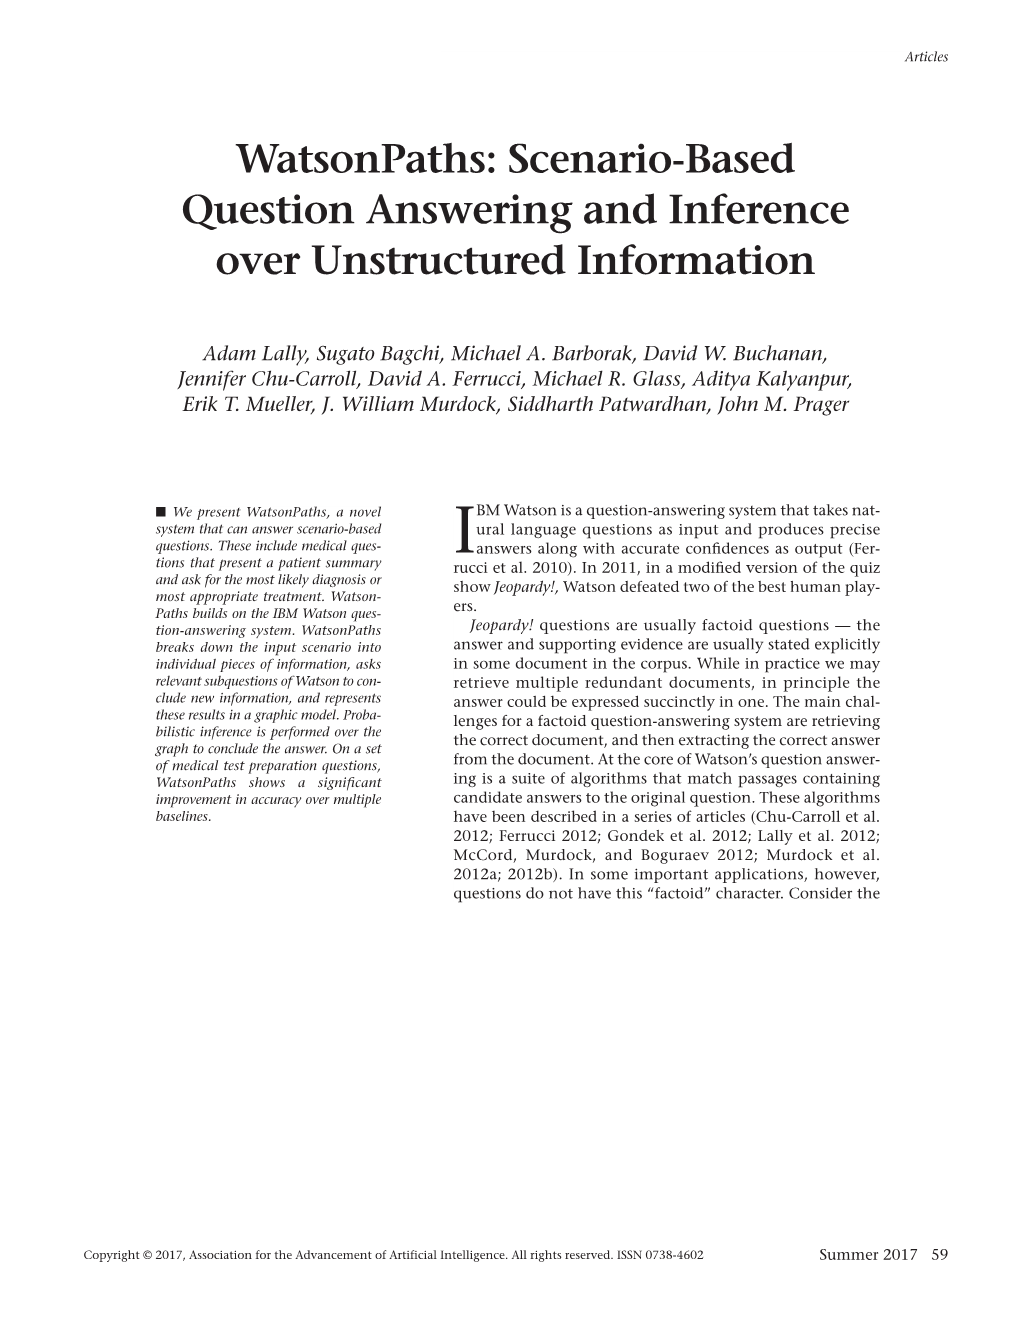 Watsonpaths: Scenario-Based Question Answering and Inference Over Unstructured Information